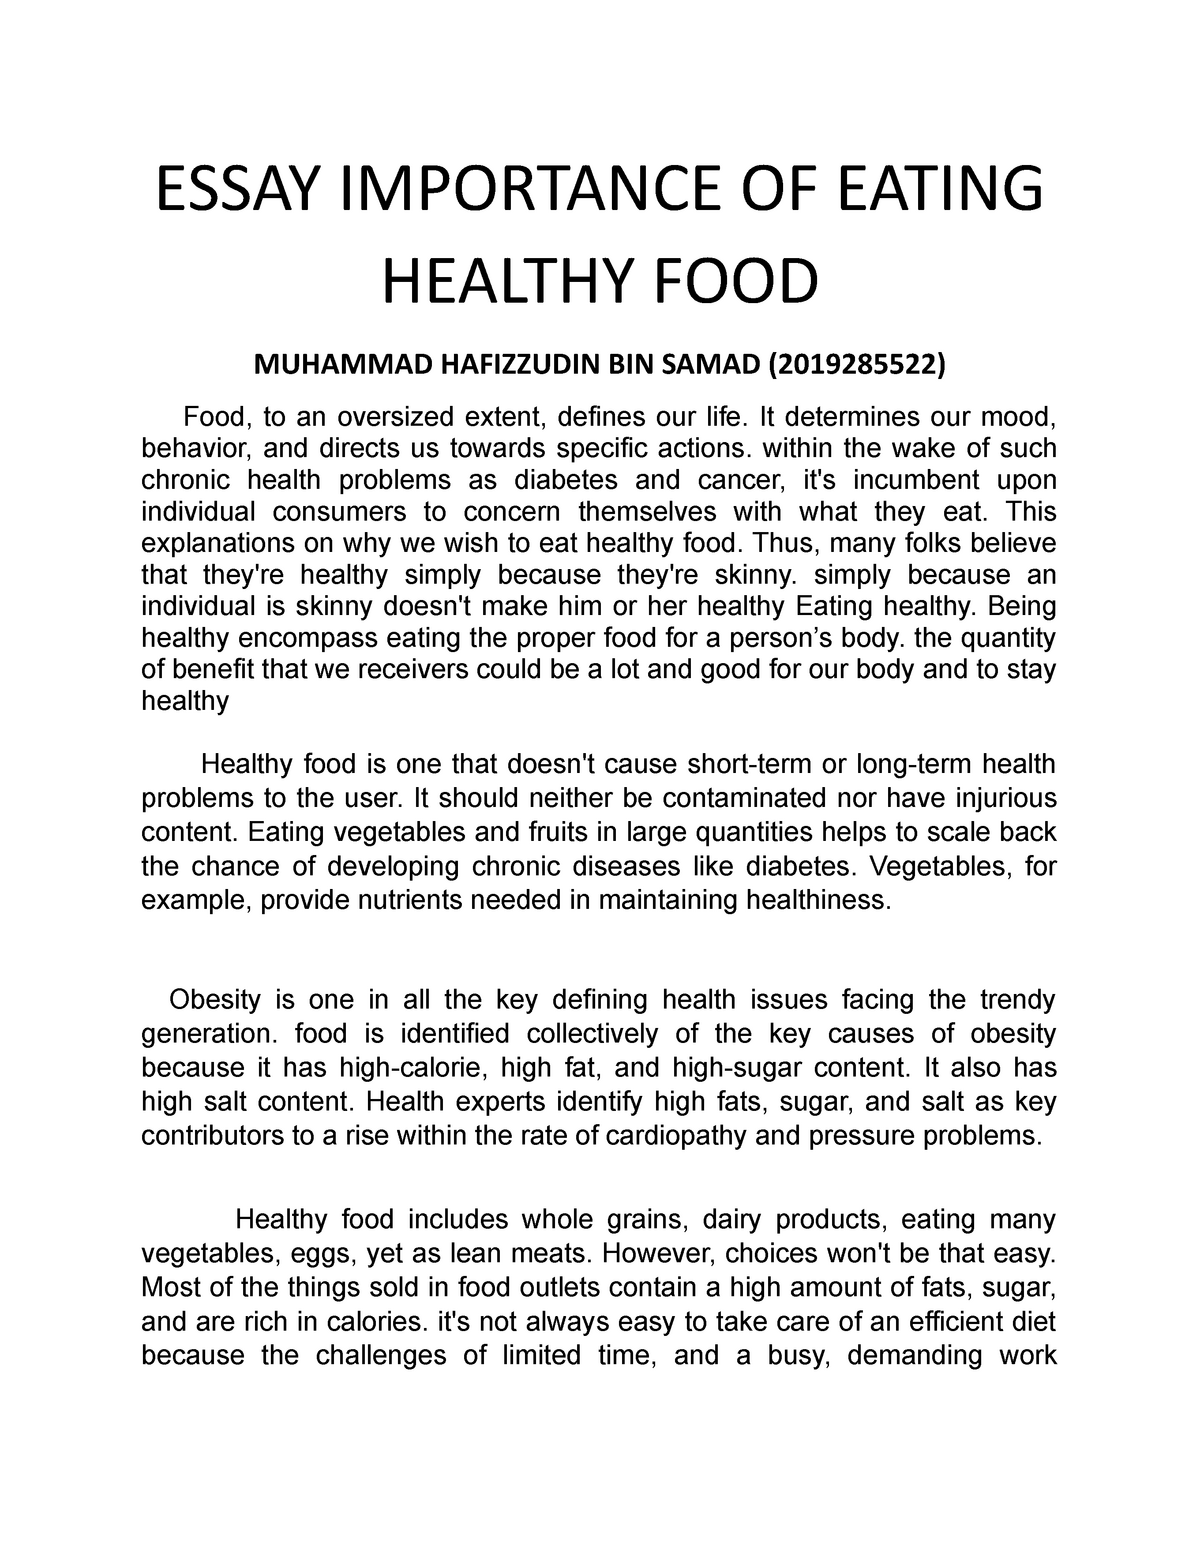 essay on healthy food for class 6